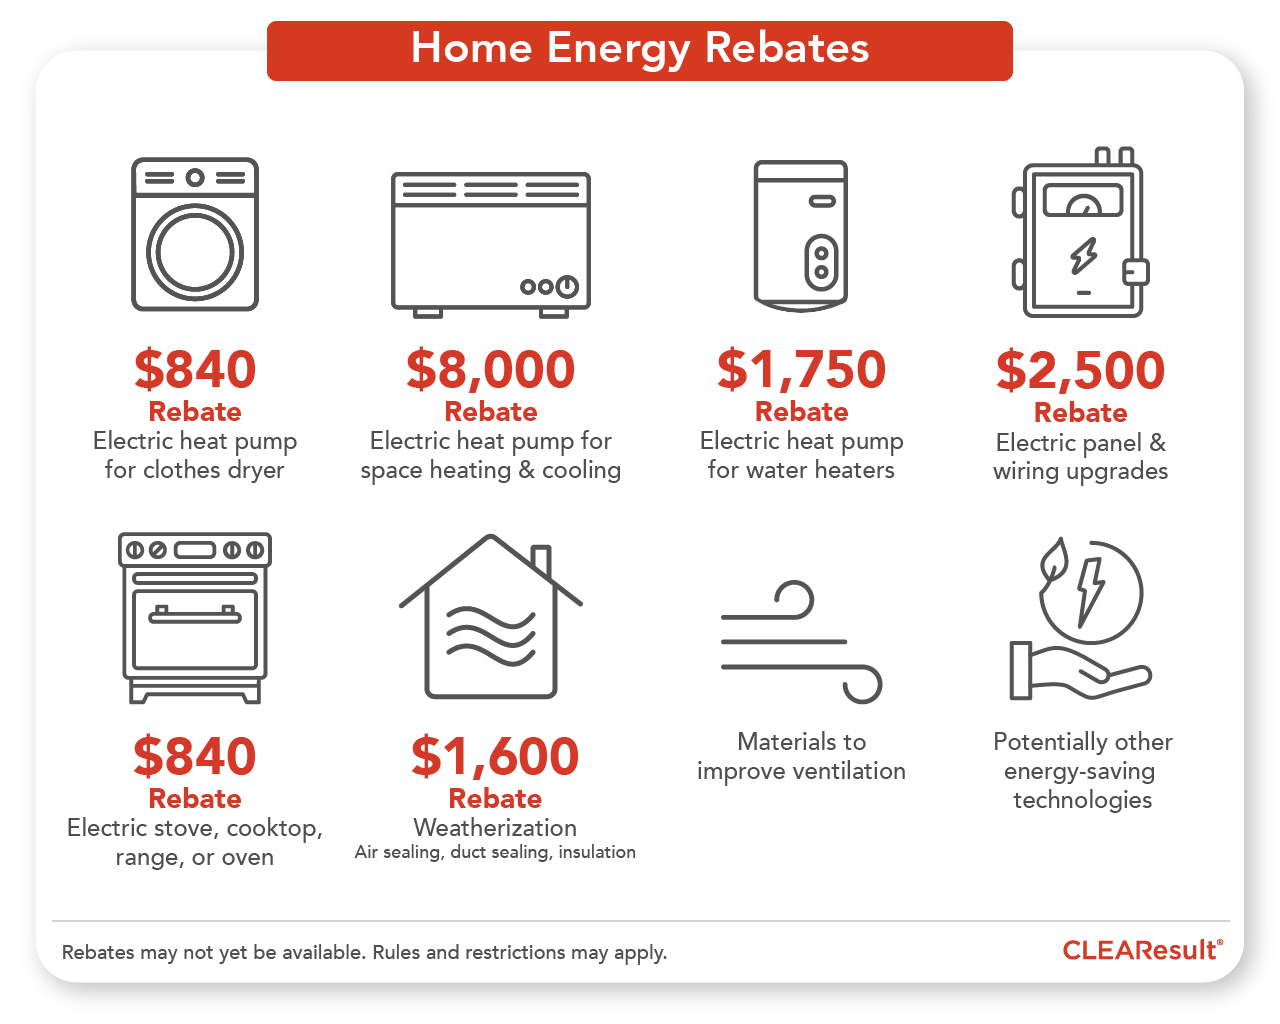 More Home Energy Rebates Are On The Way Here s What The Inflation 